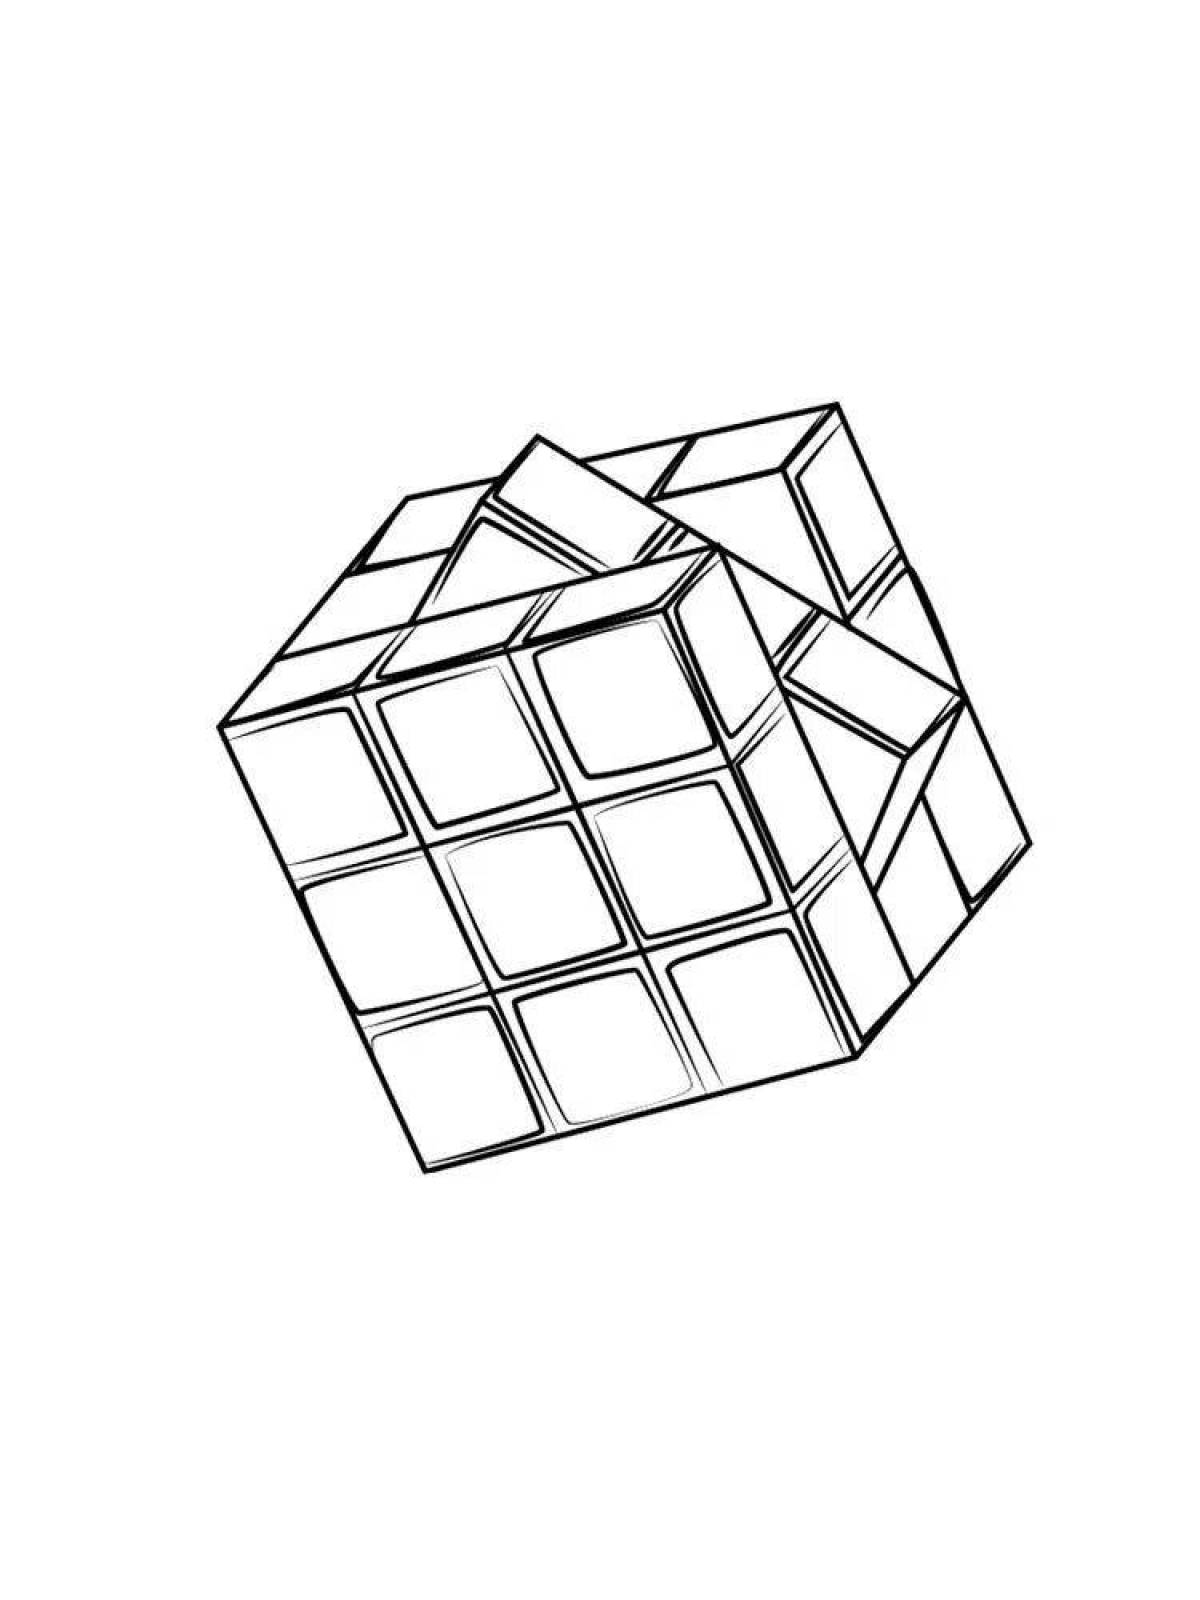 Attractive rubik's cube coloring page